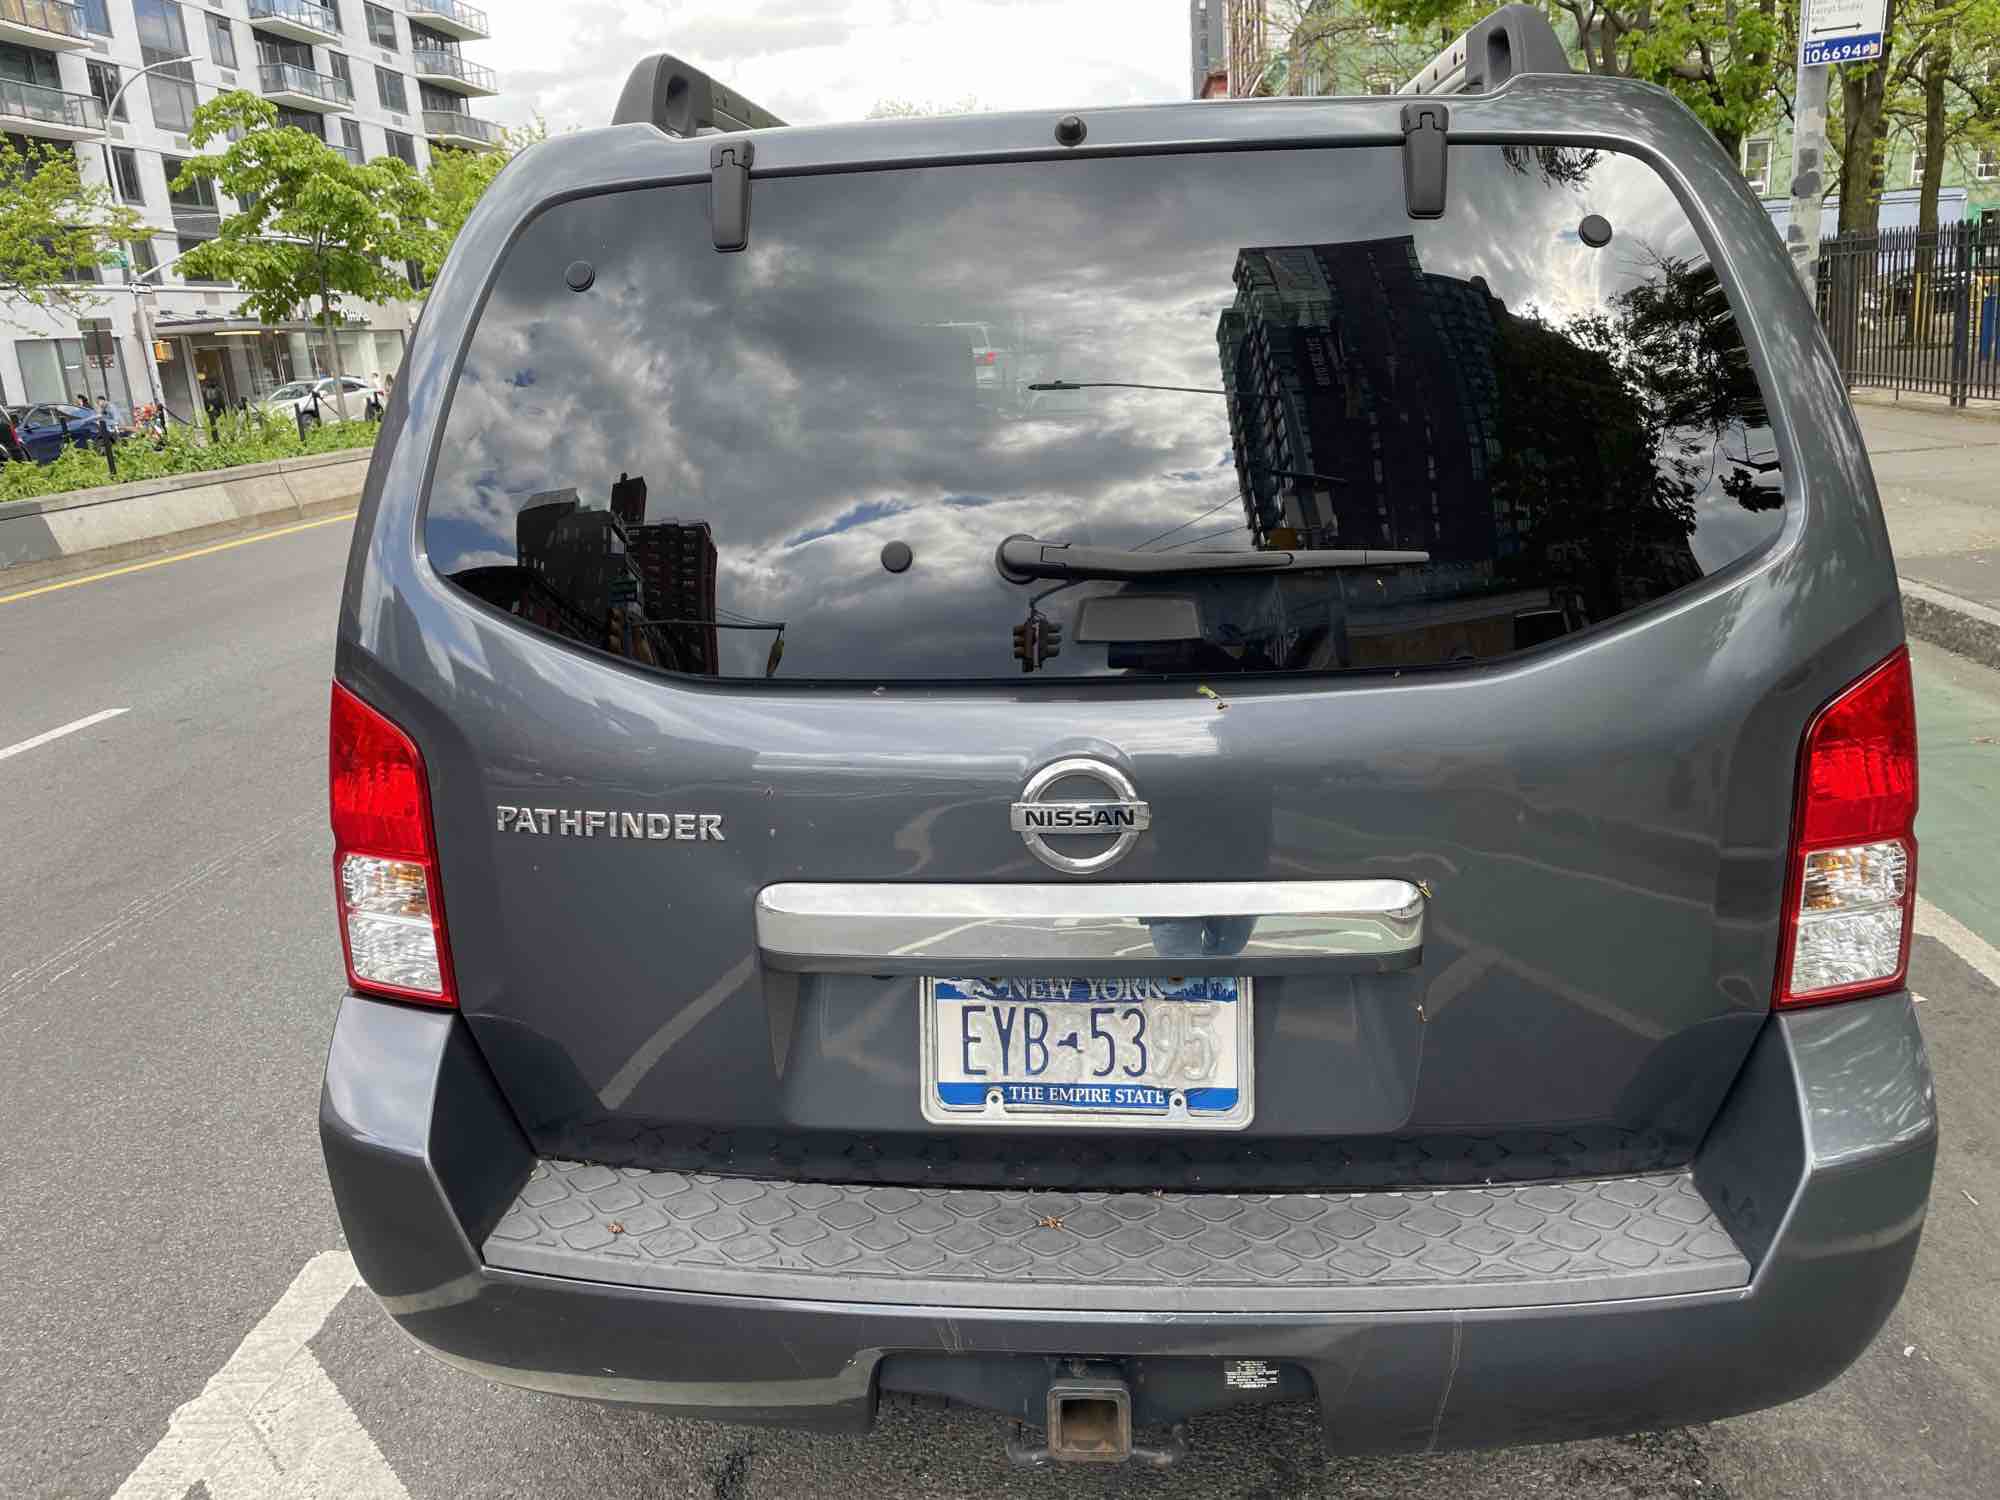 An SUV with a defaced license plate.